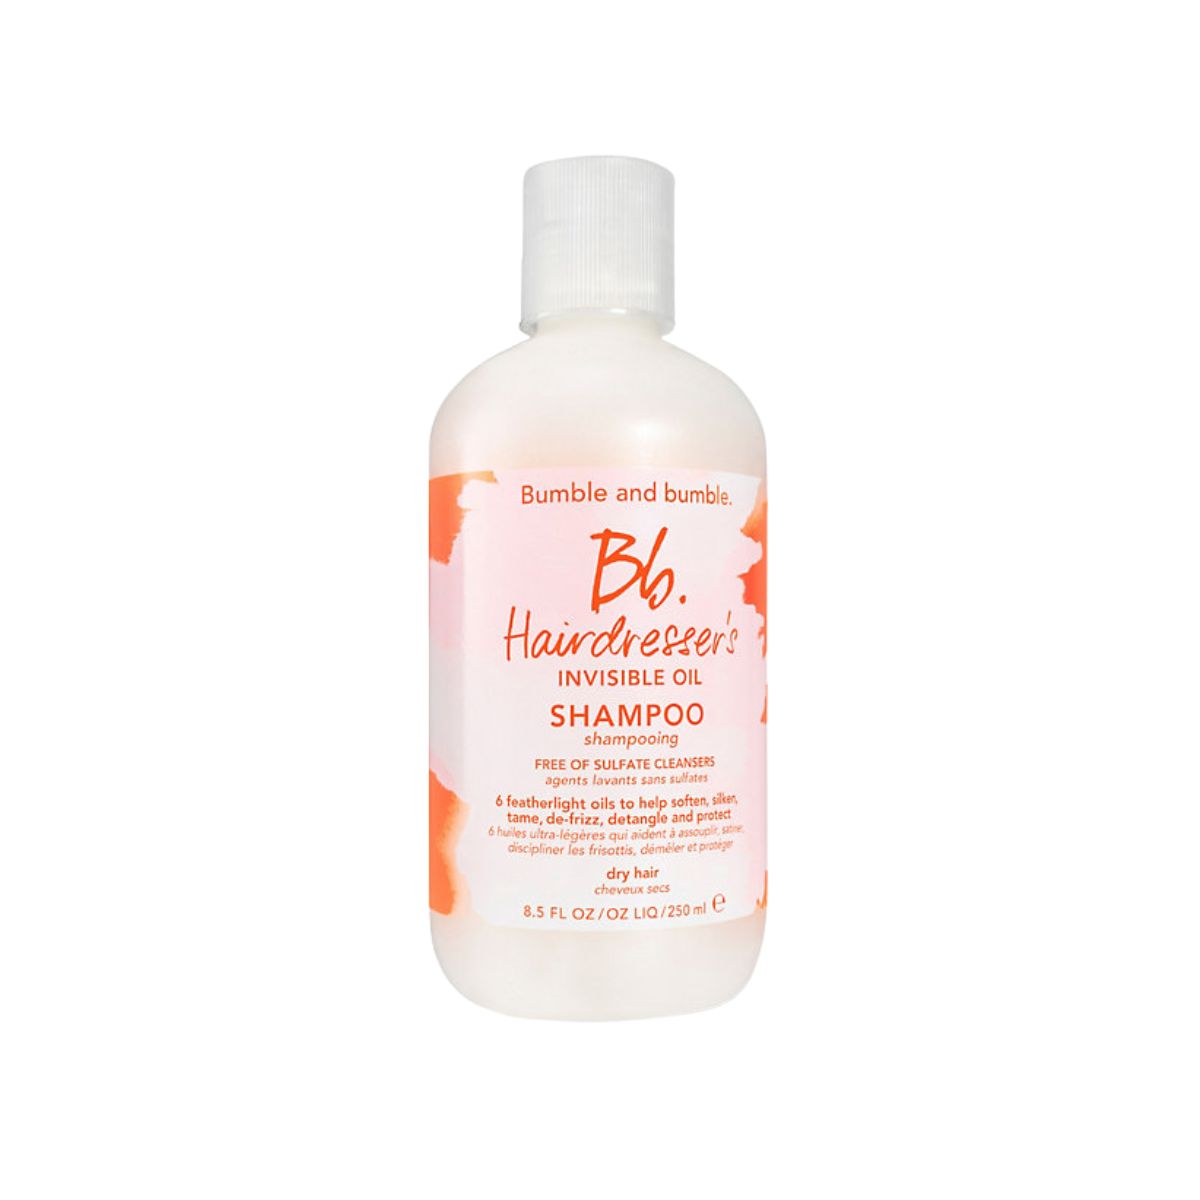 Bumble and Bumble Hairdressers Shampoo 250ml